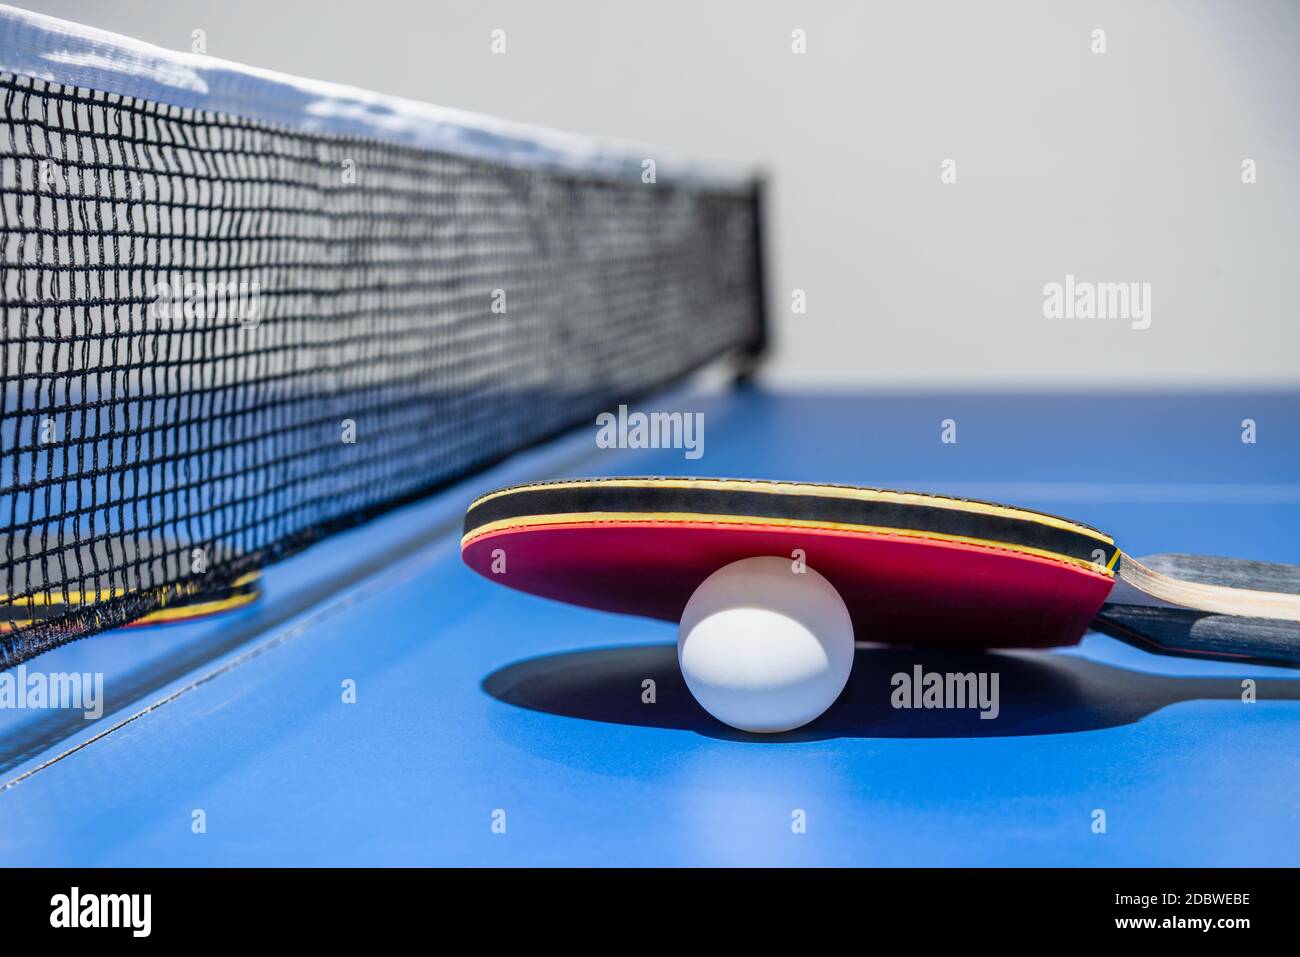 Closeup red table tennis racket and a white ball on the blue ping pong table with a black net, Table tennis paddle is a sports competition equipment i Stock Photo